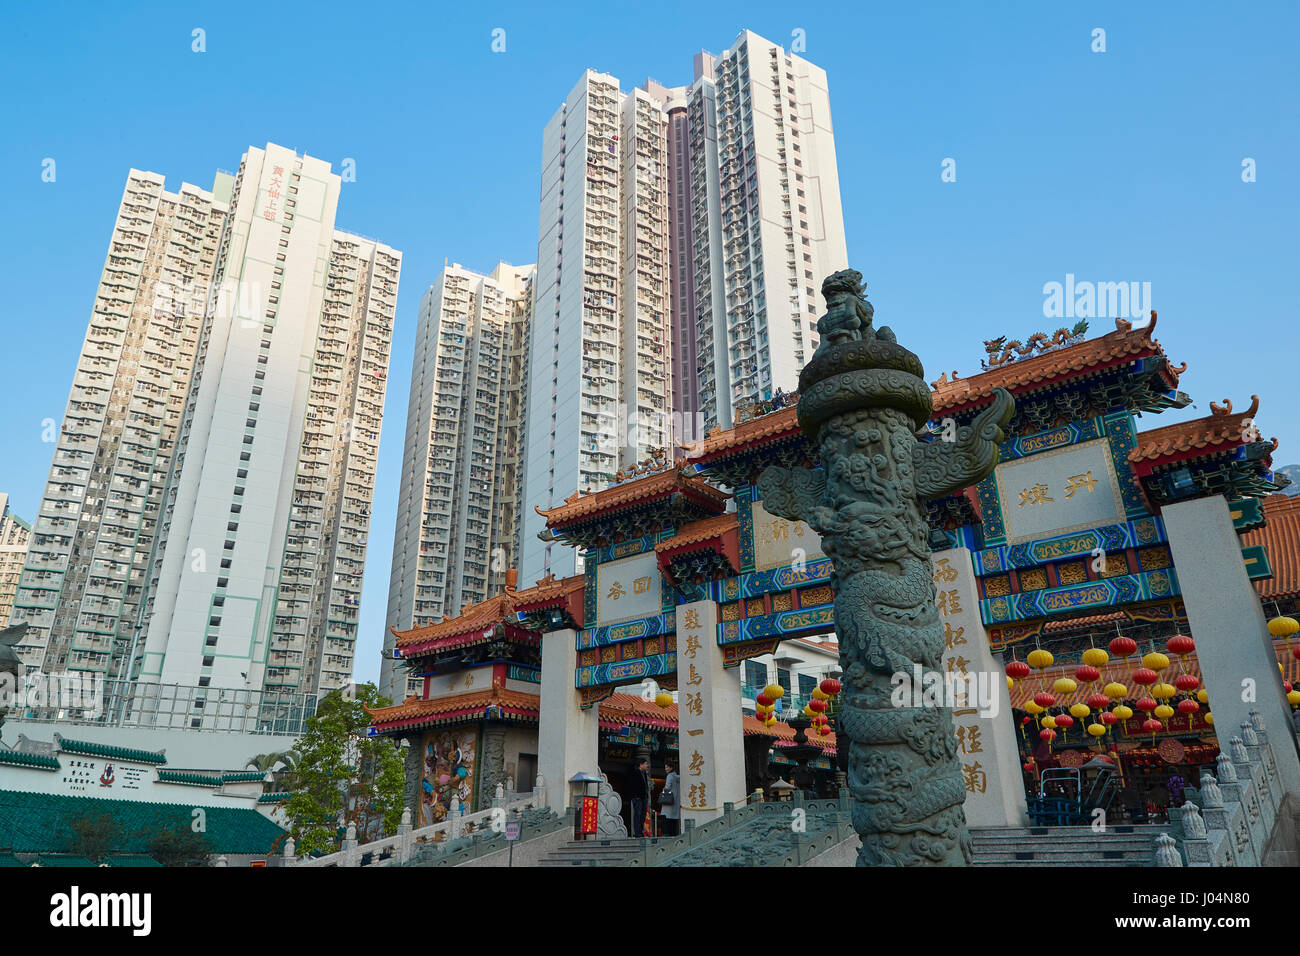 Ornate Traditional Chinese Gateway Contrasts With The Hong Kong Skyline At The Wong Tai Sin Temple, Hong Kong. Stock Photo